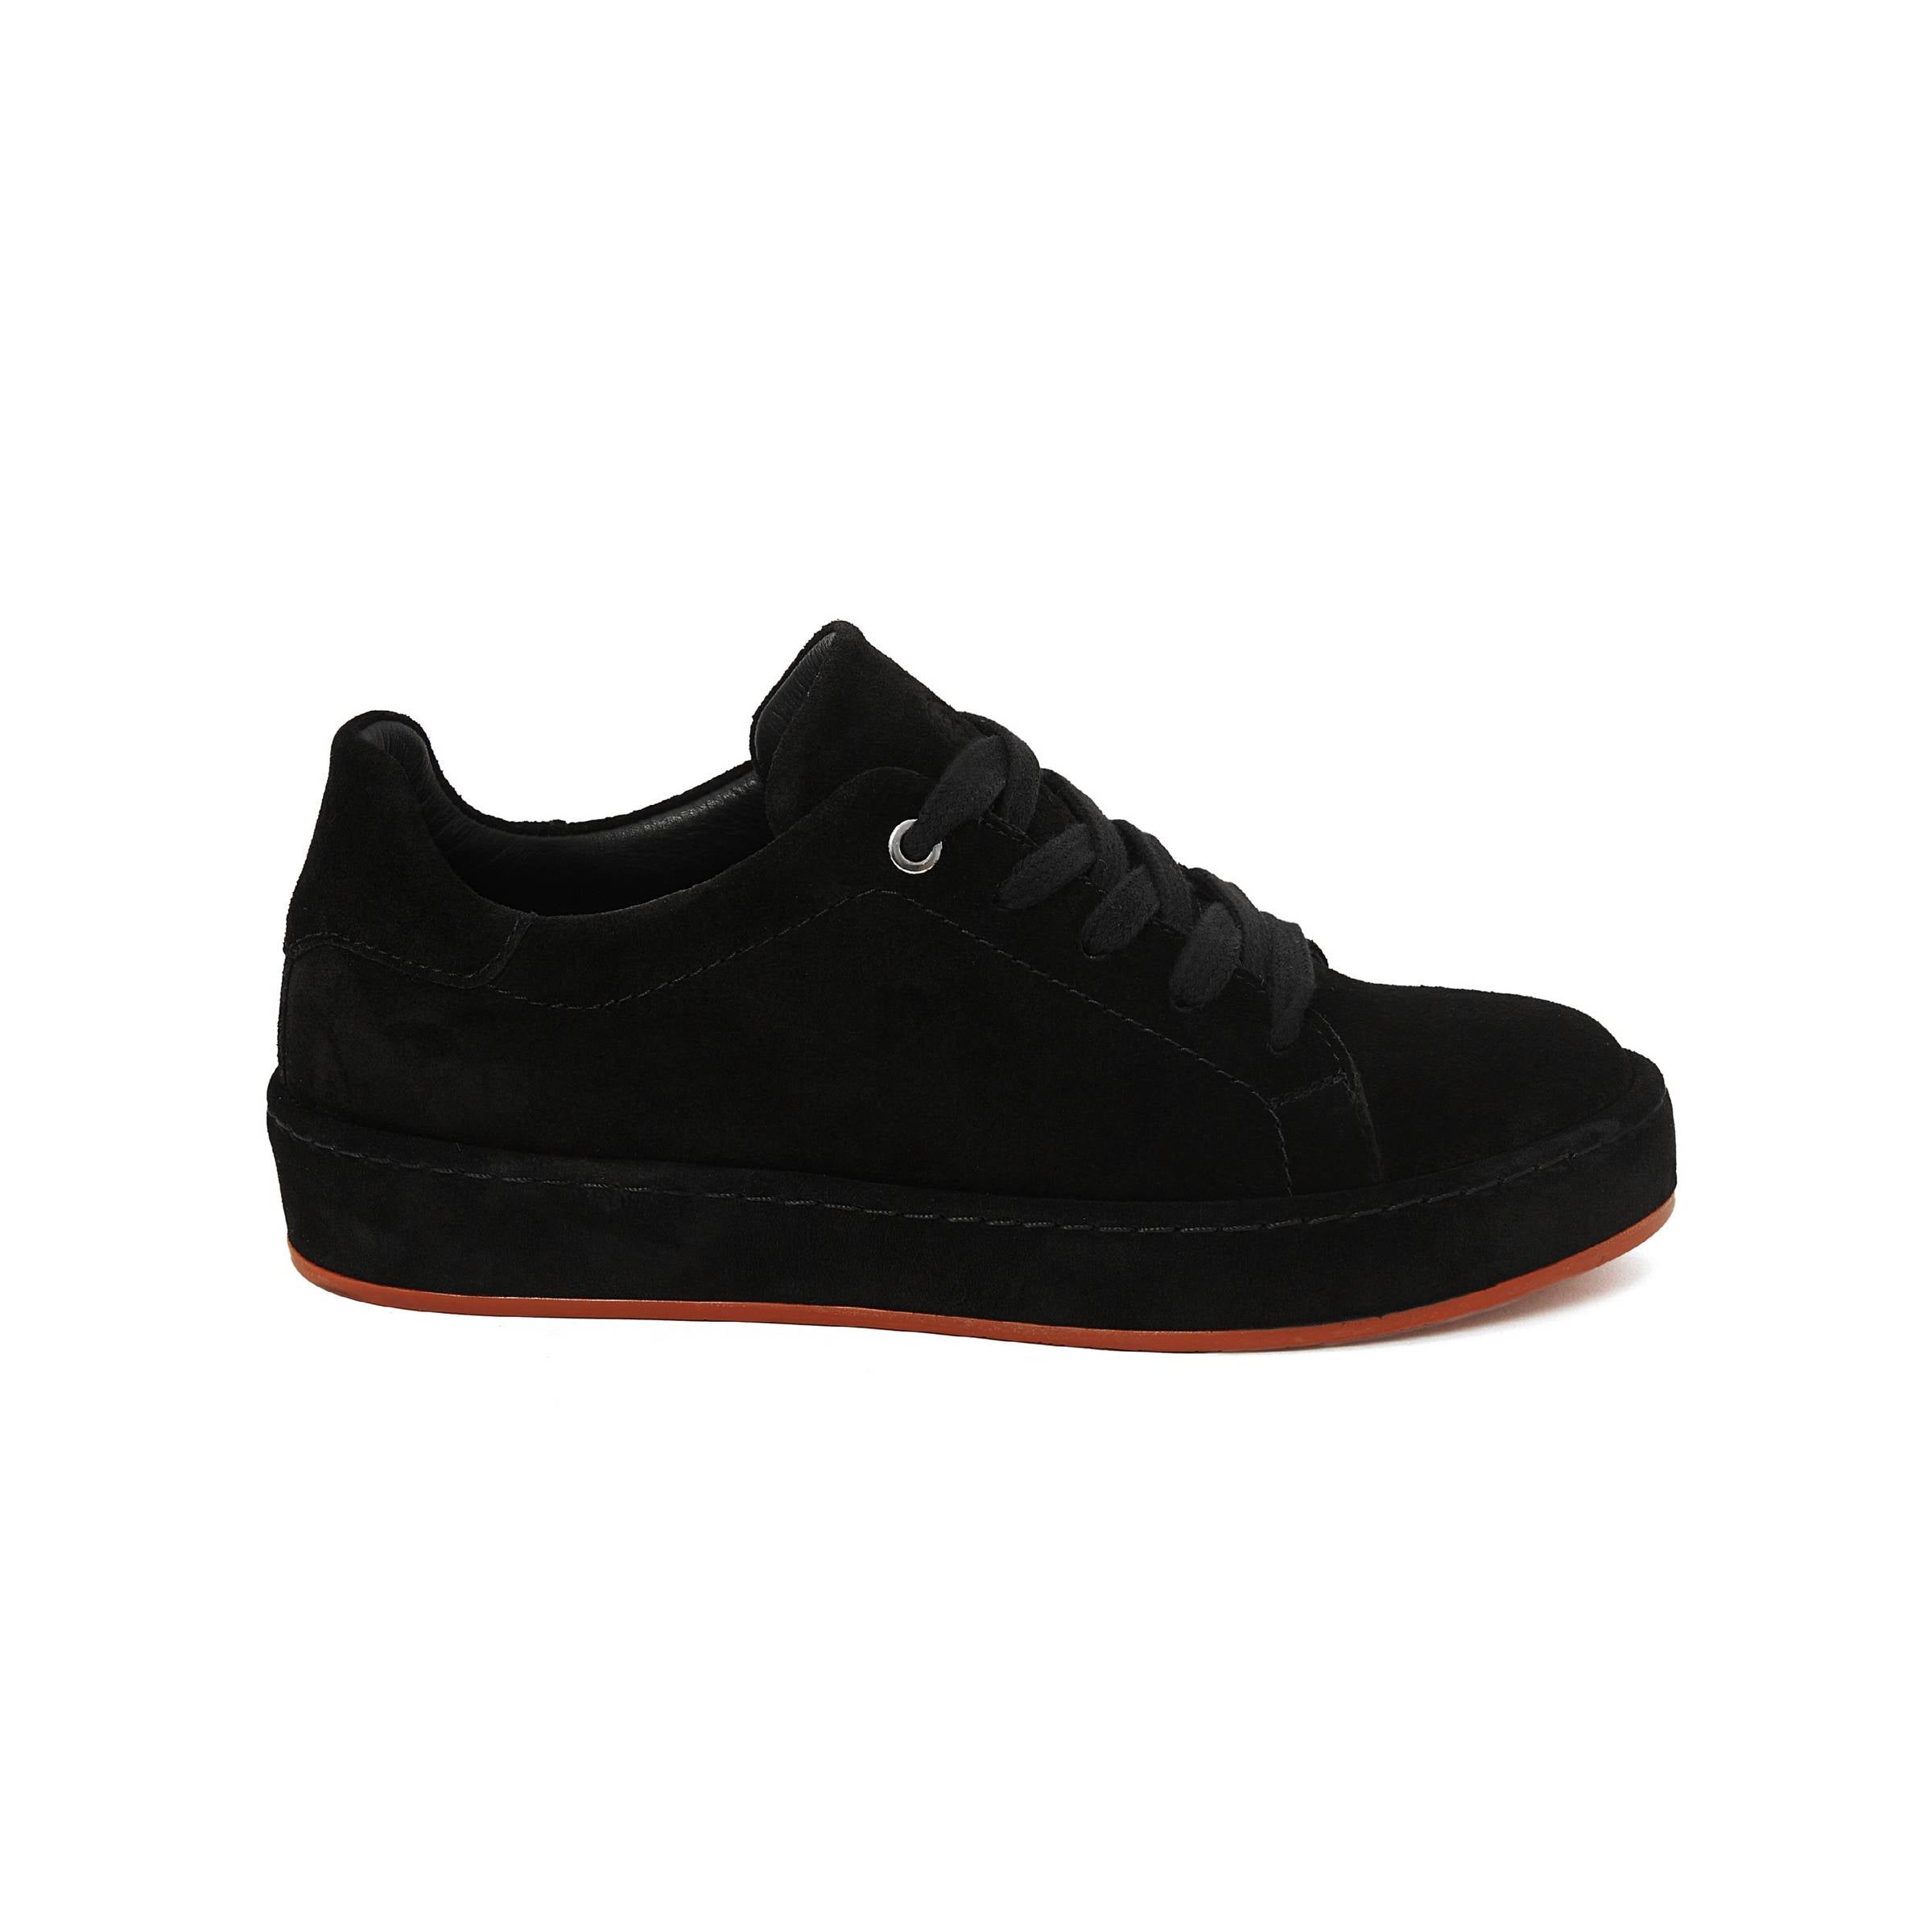 Women's Suede Calf Leather Handmade Sneakers W5007